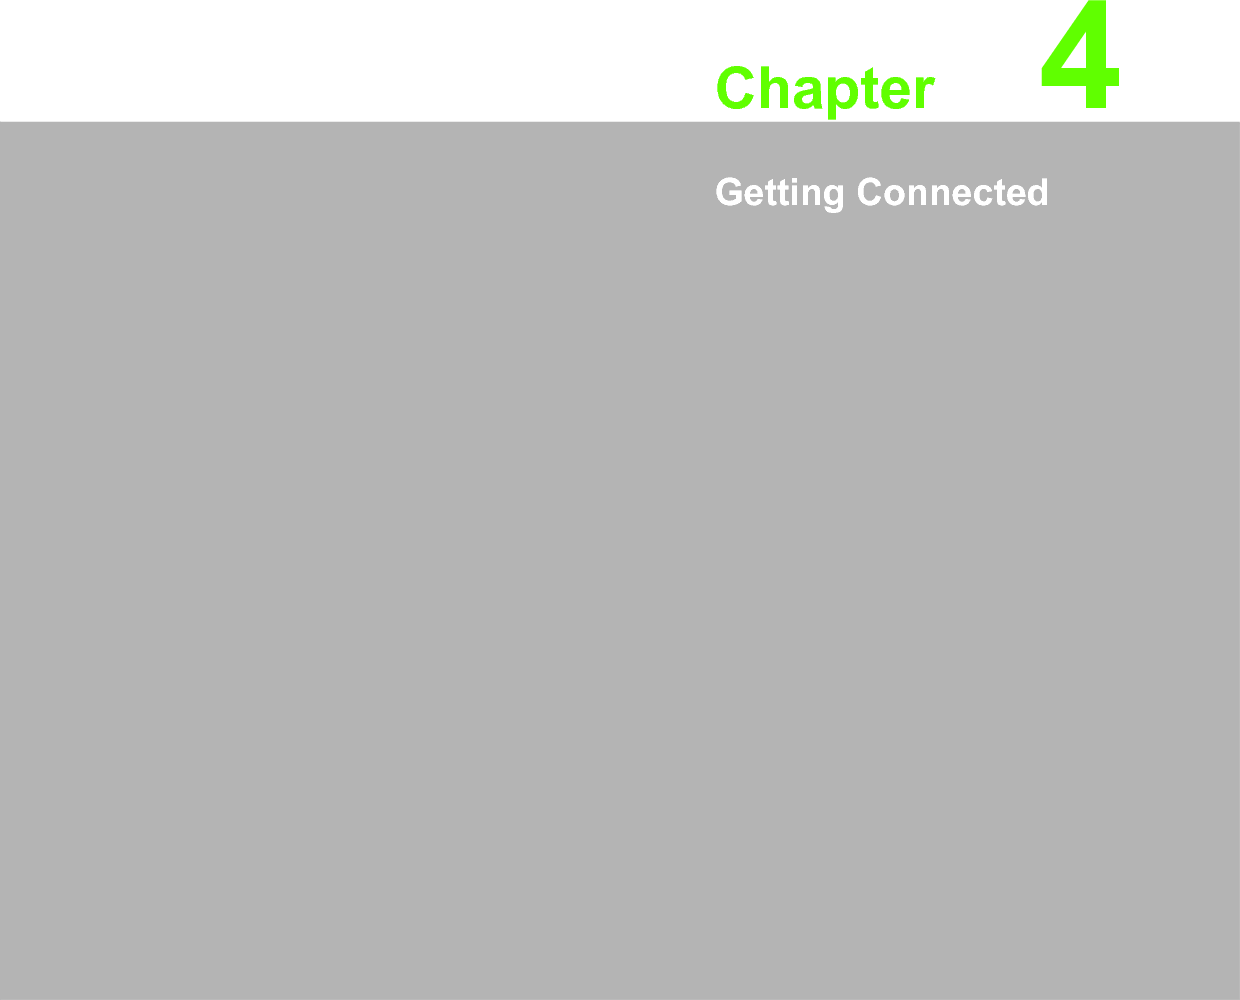 Chapter 44Getting Connected